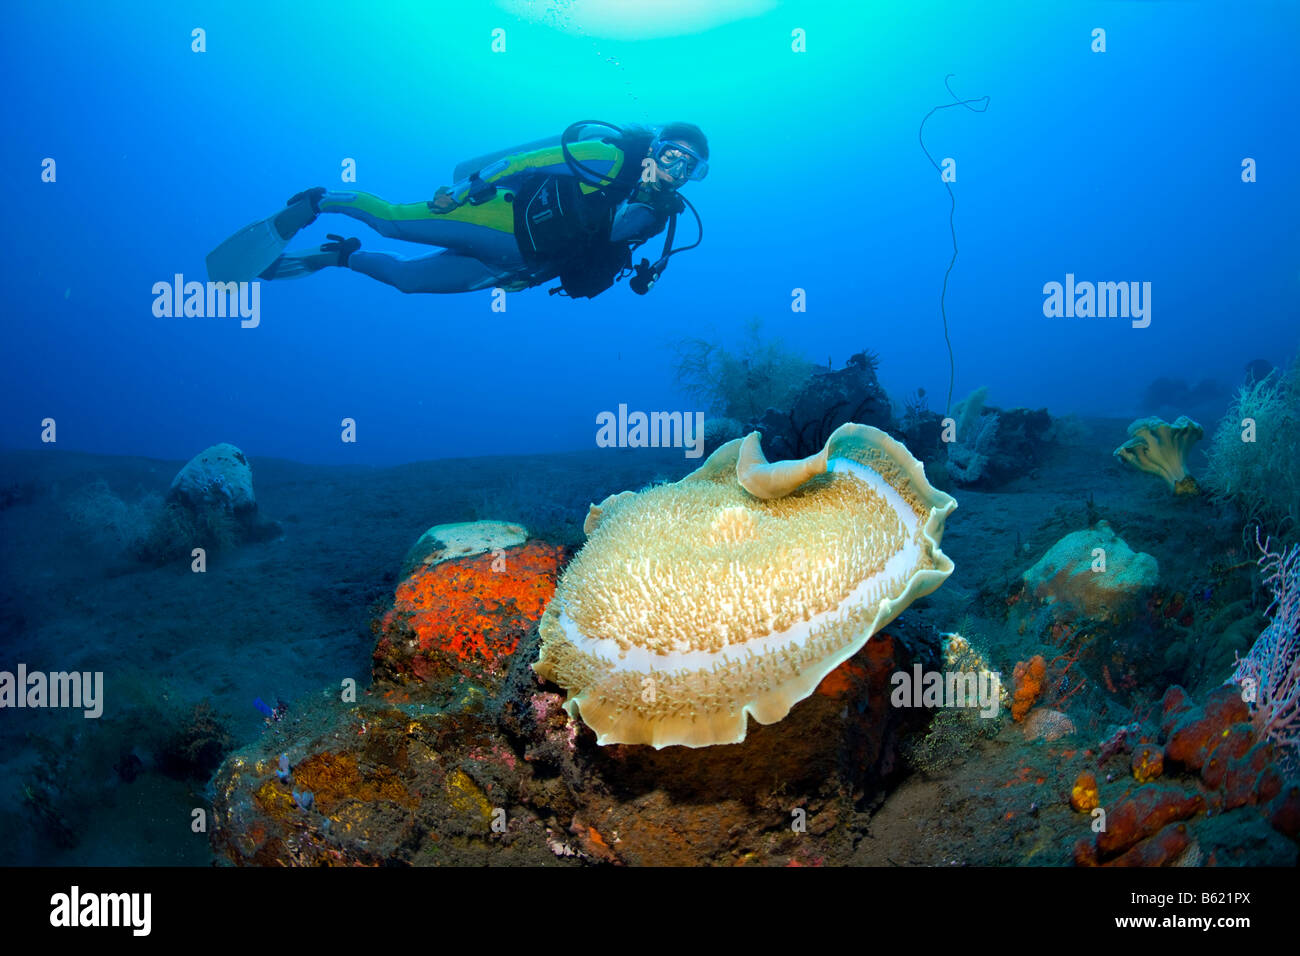 Scuba diver swimming behind a Giant Cup Mushroom Coral or Giant Coral Anemone (Amplexidiscus fenestrafer) attached to black vol Stock Photo